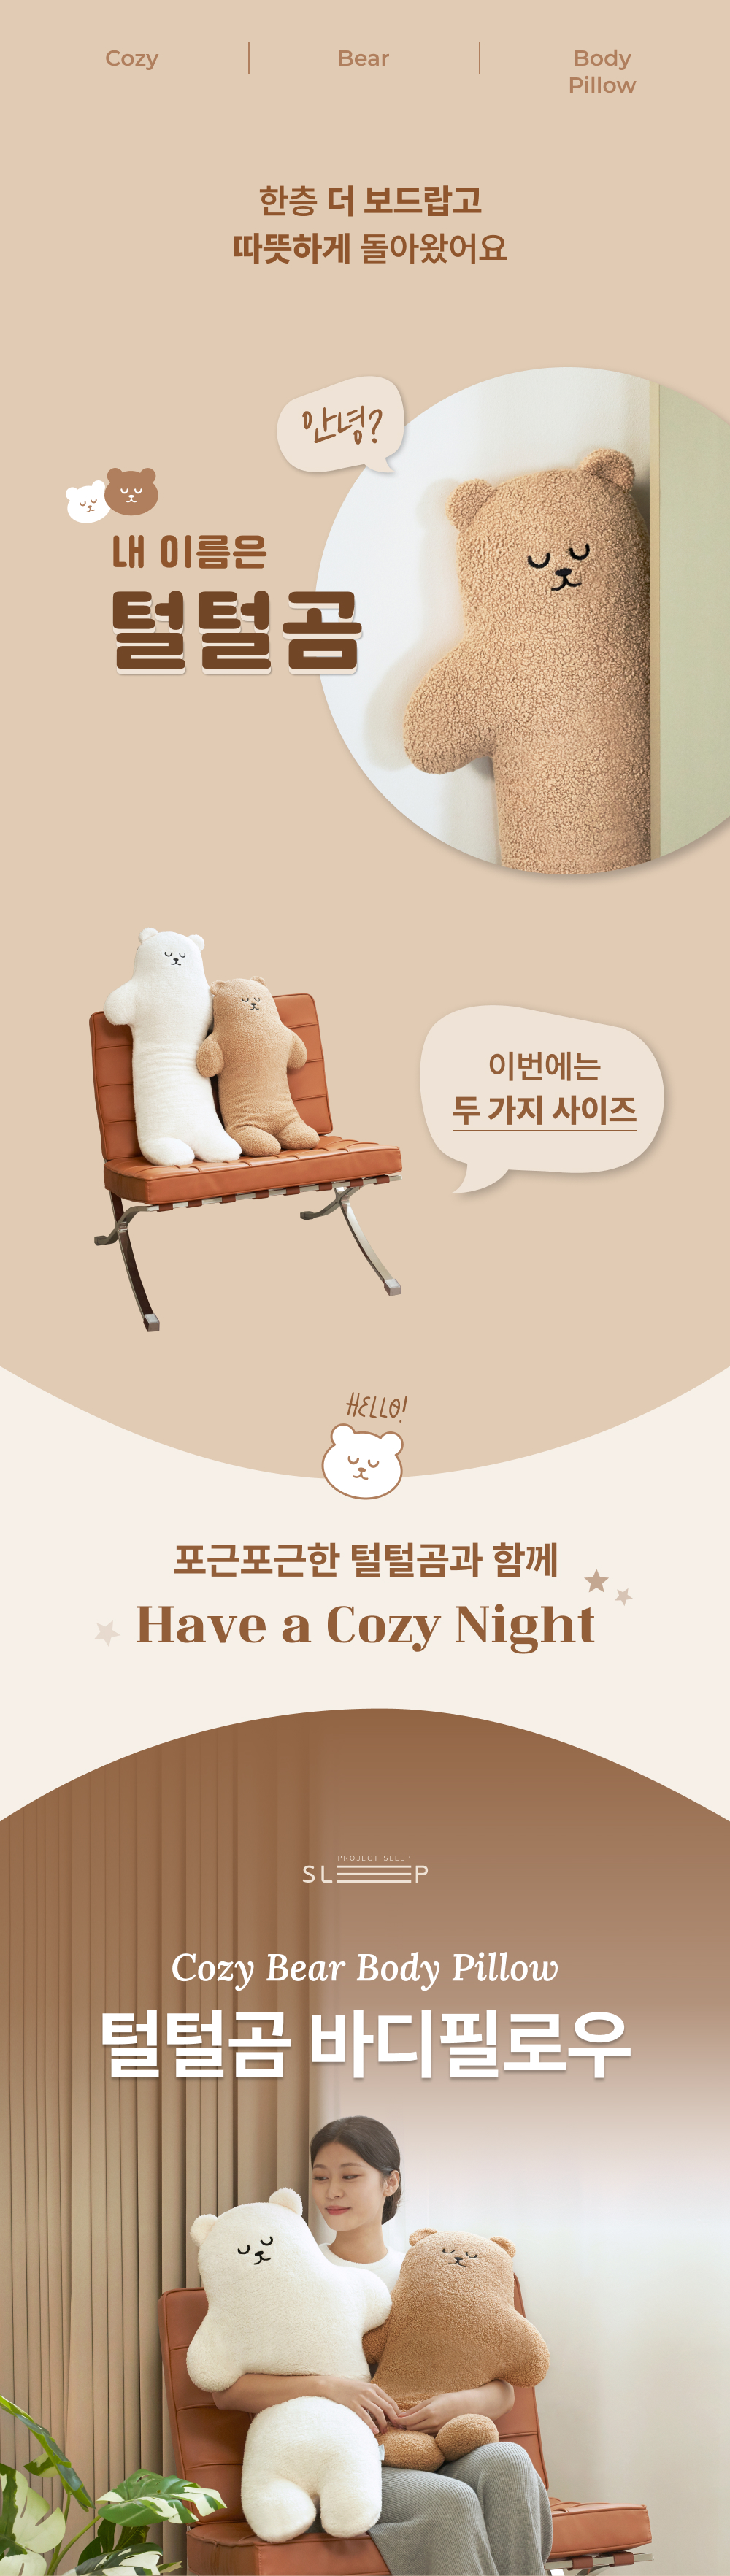 PS_CozyBearBodyPillow_detailpage_1_182249.jpg